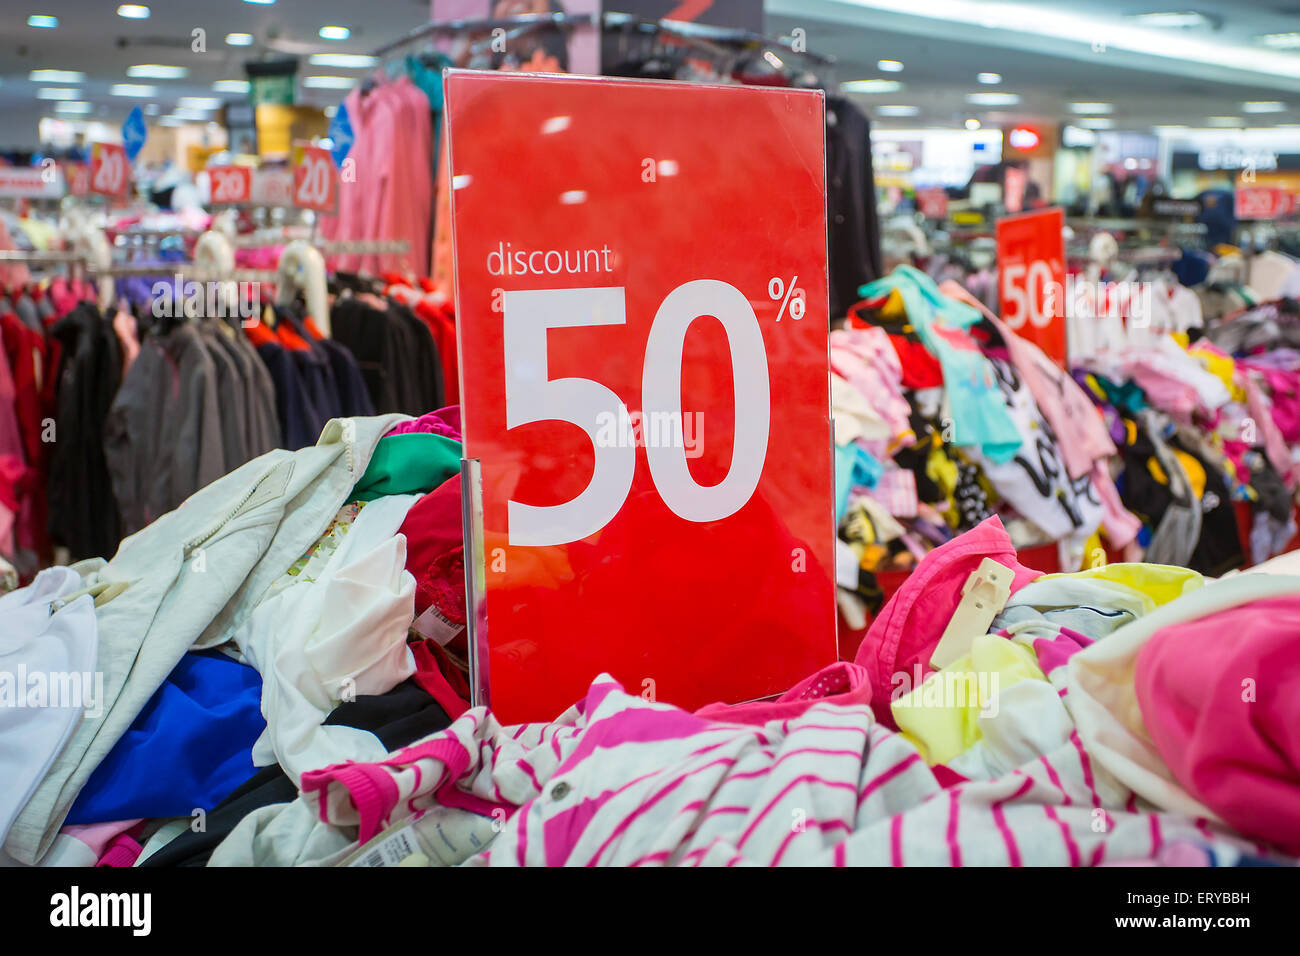 Sale sign in the clothing shop Stock Photo